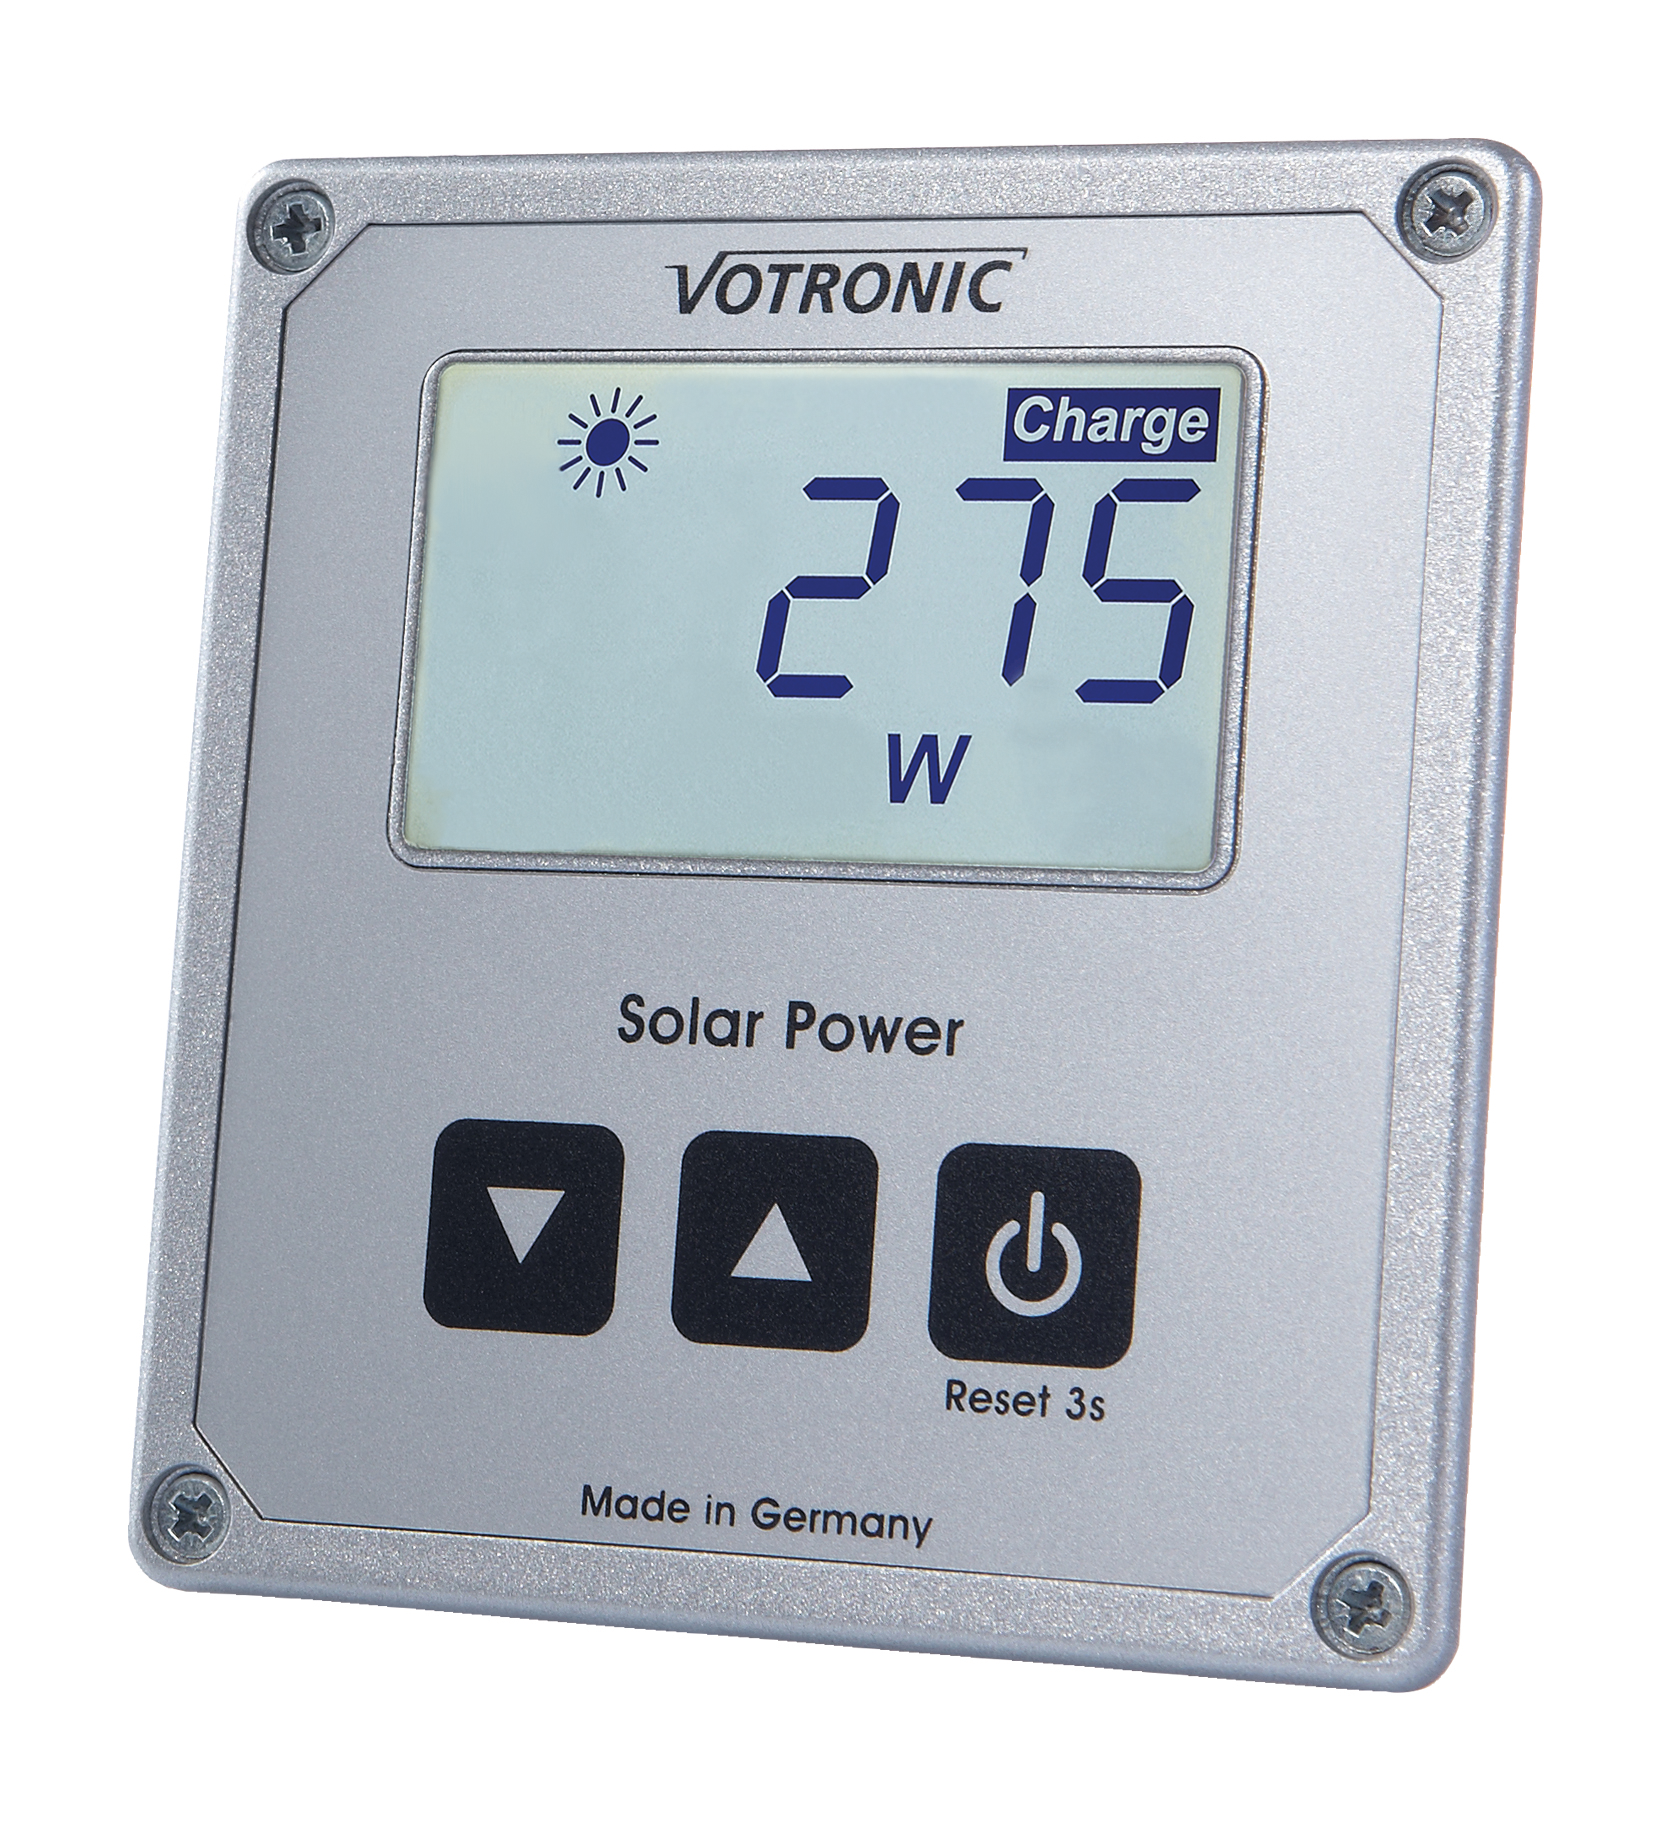 Votronic 1250 LCD solar computer s for mpp and sR series